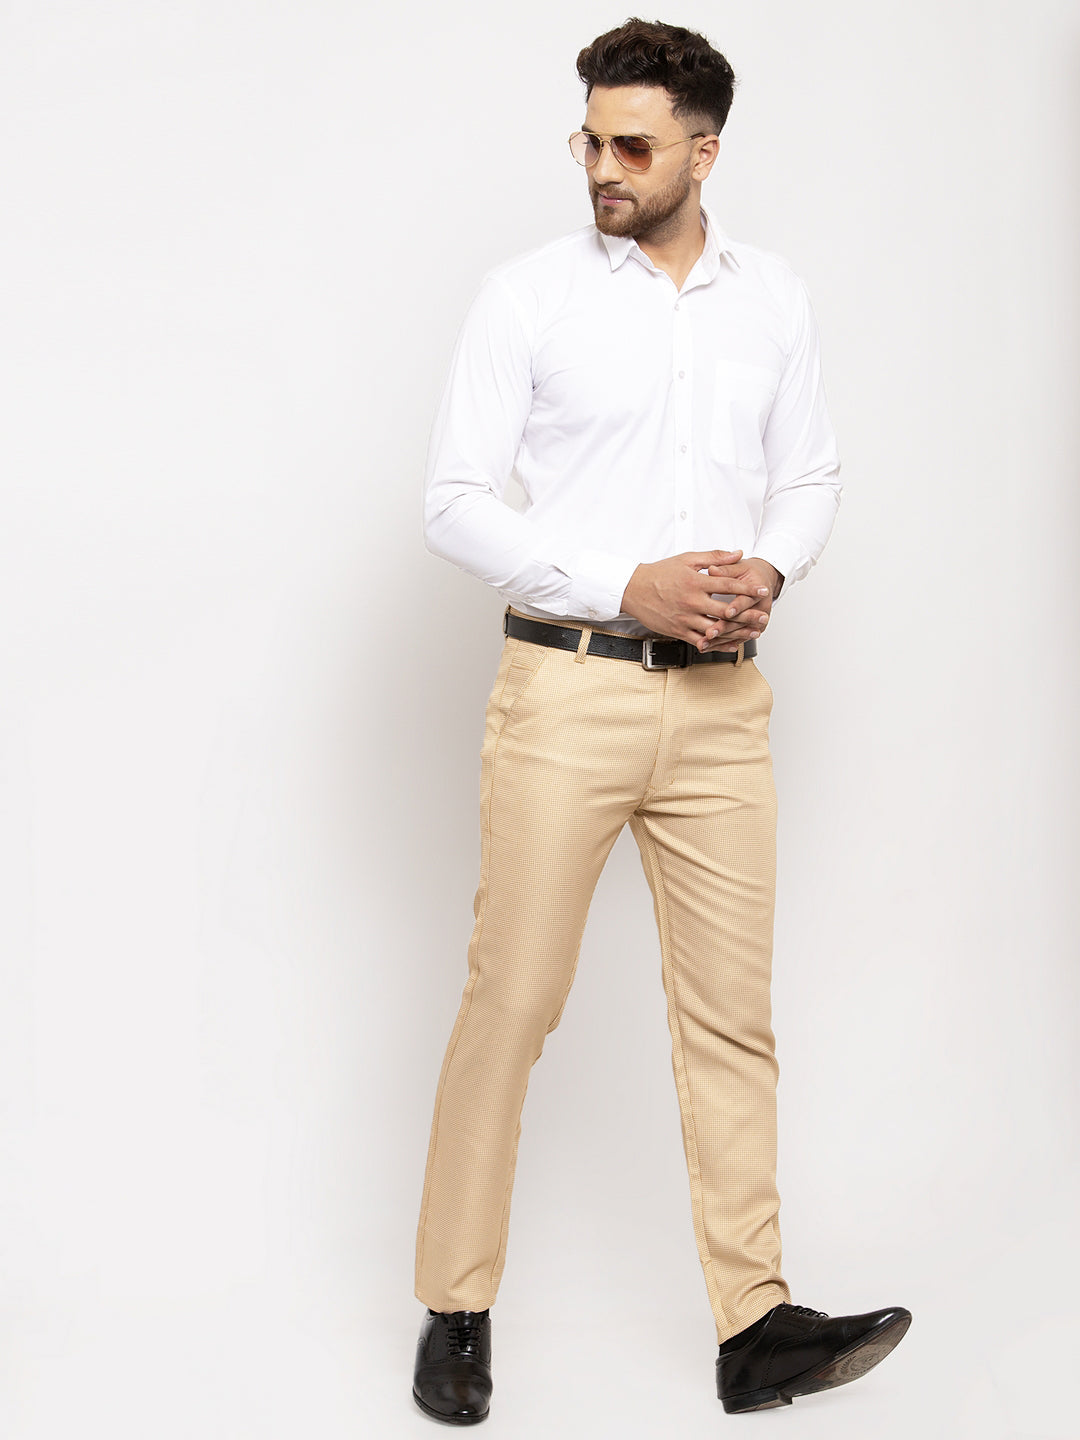 Relaxed Fit Corduroy trousers - Cream - Men | H&M IN